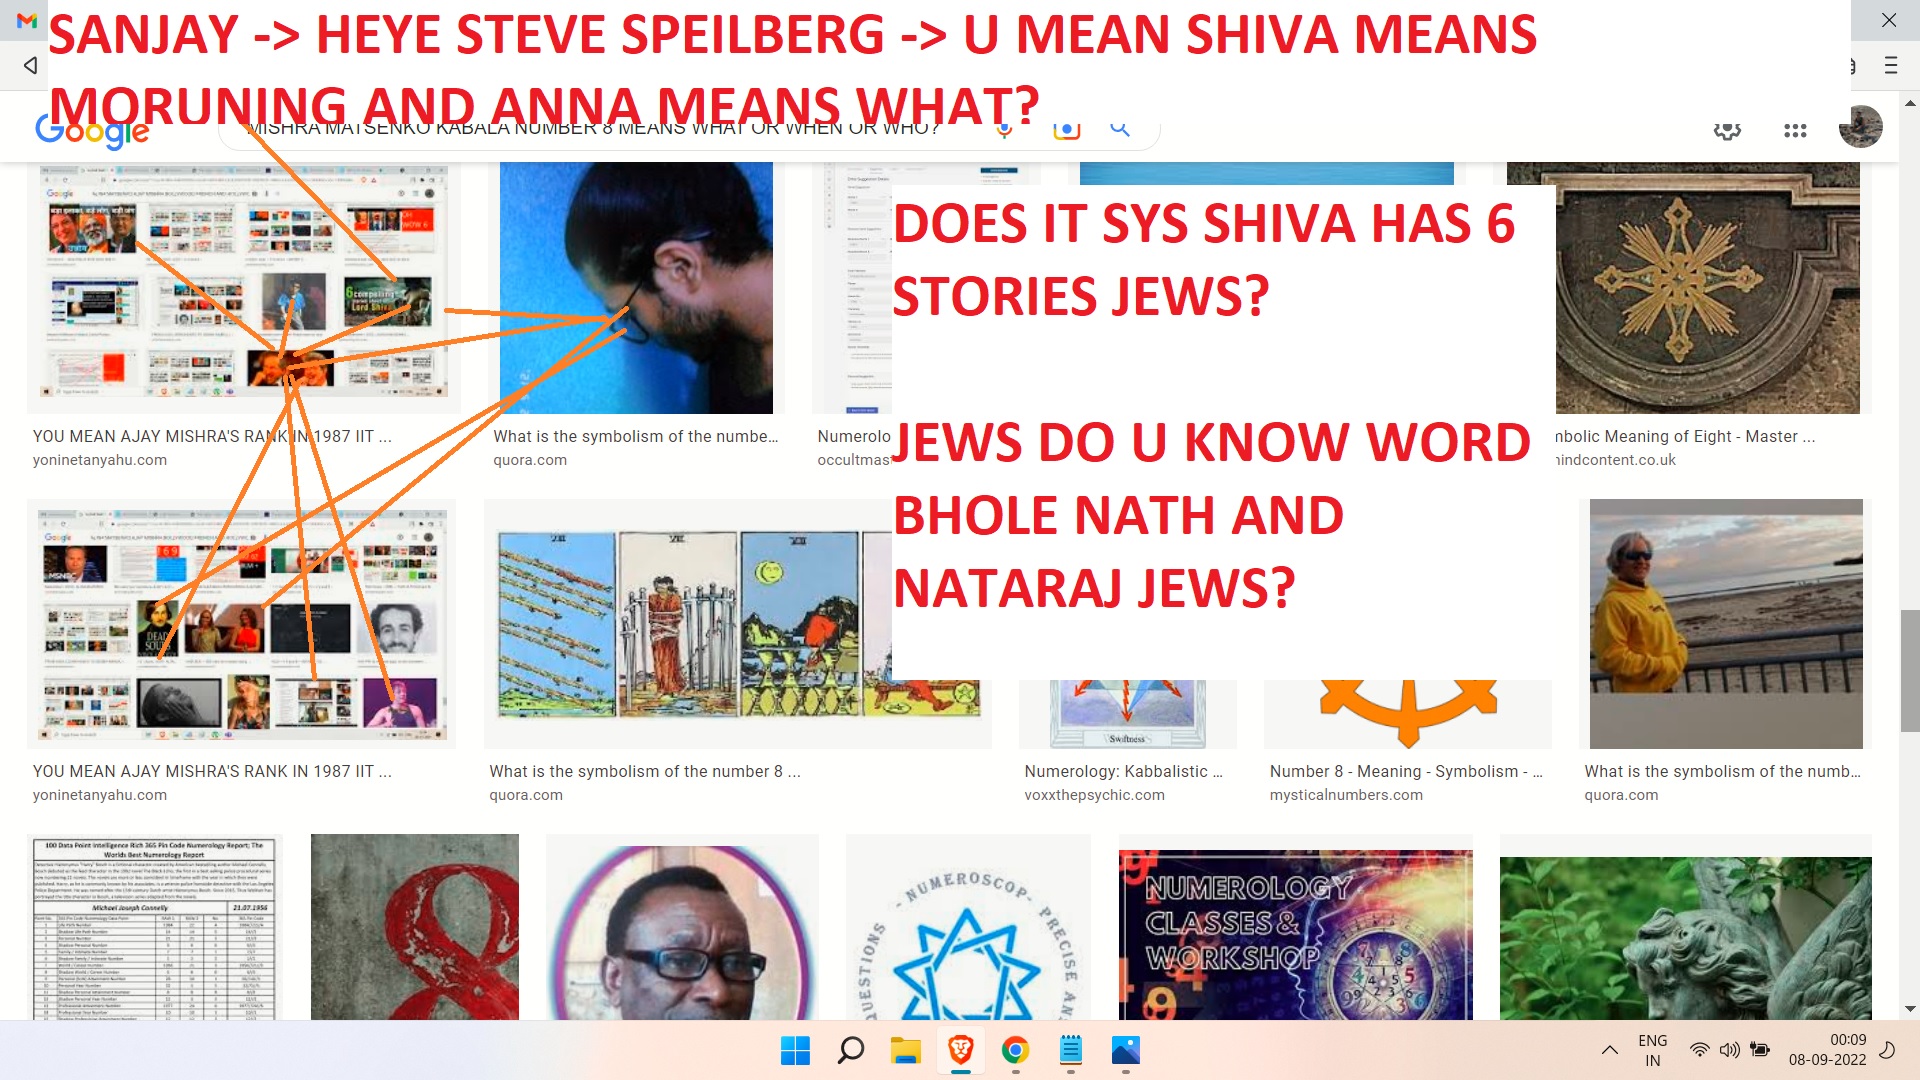 MISHRA MATSENKO KABALA NUMBER 8 MEANS WHAT OR WHEN OR WHO ---- JOE BIDEN IS JEW OR FUNNY ---- ---------WOW SPEIL ERG AND SNAJAY DUTT AND BIBI NETANAYHU AND CLINTONS